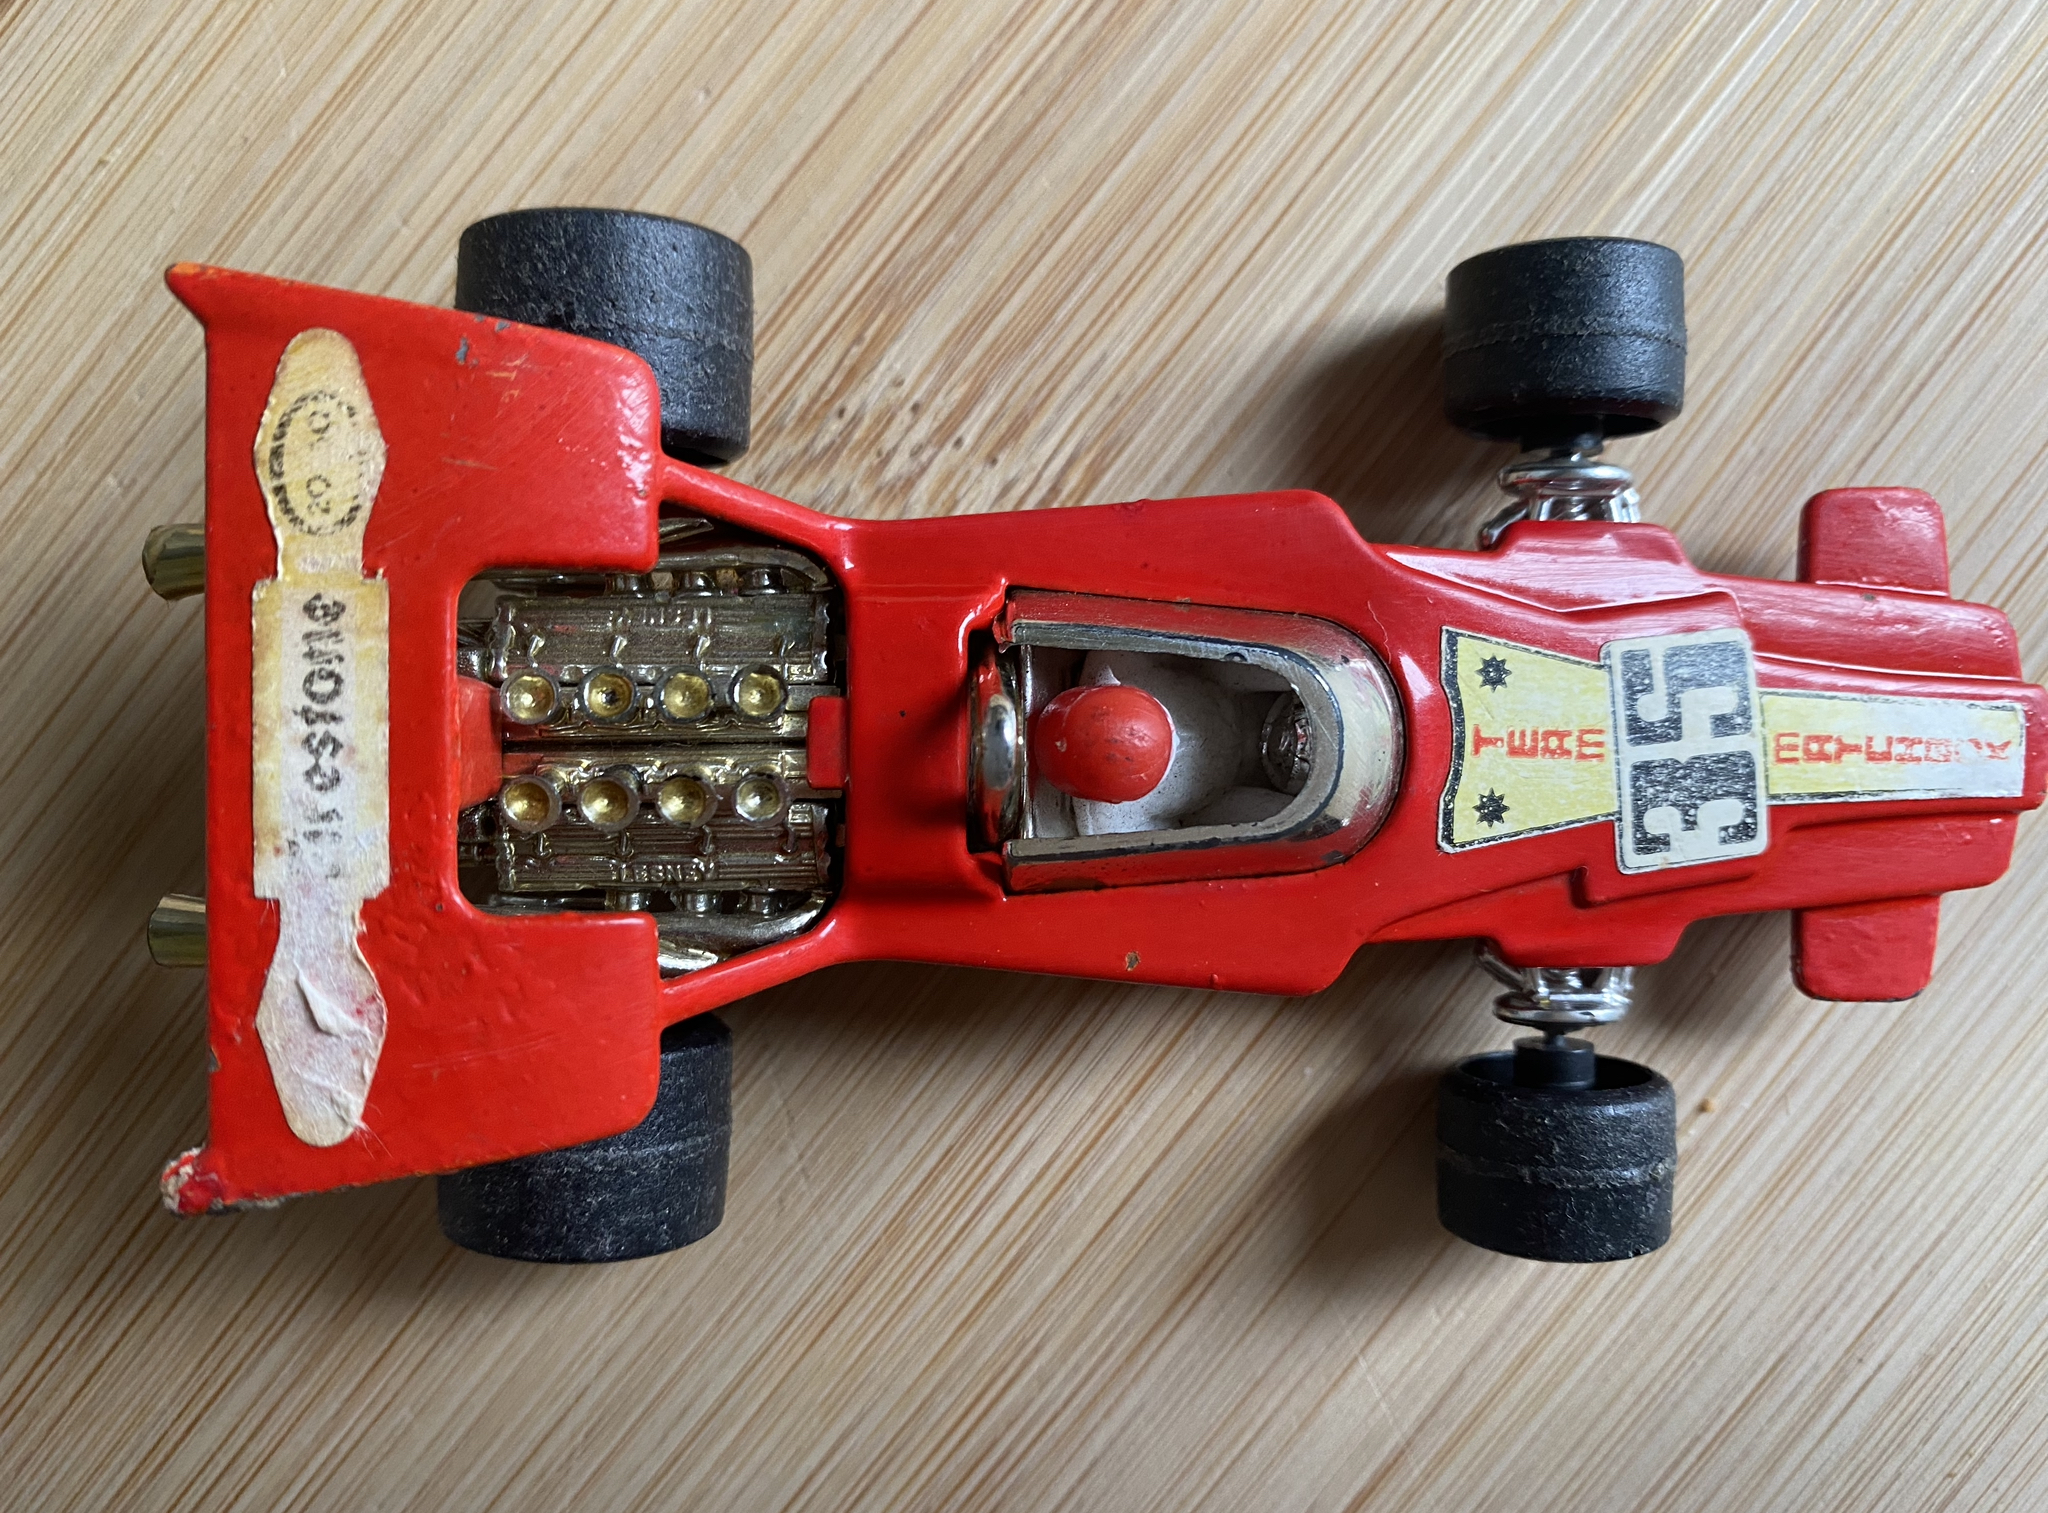 Formula One Racing Car Team #35 by Matchbox Vintage Original 1971 Makers Made in England Collectors Antique Classic Red Firestone Toys Cars Speedkings LESNEY PRODUCTS &.Co Limited Trending British collection Edition